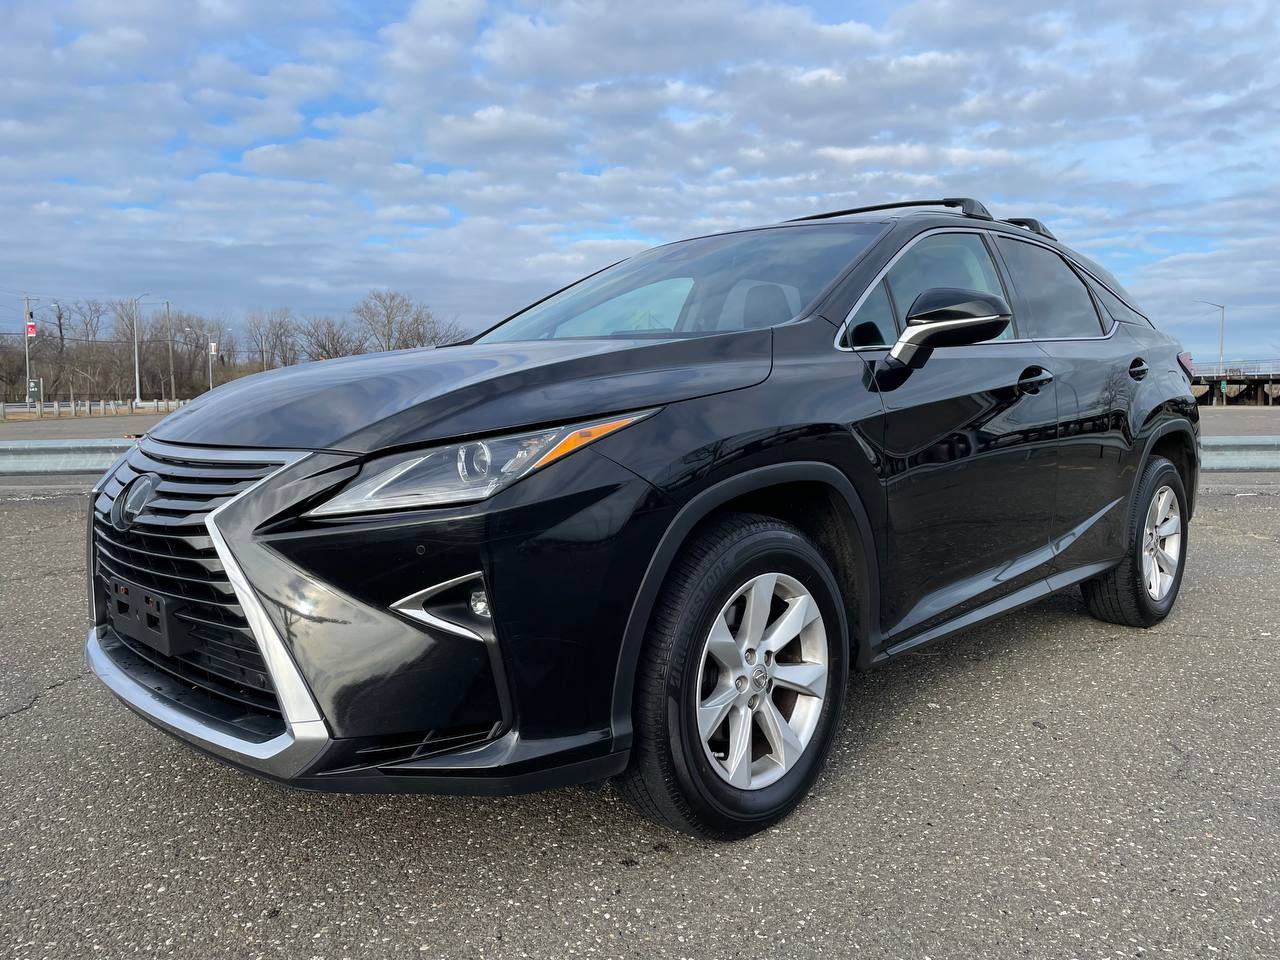 Used Car - 2017 Lexus RX 350 AWD for Sale in Staten Island, NY